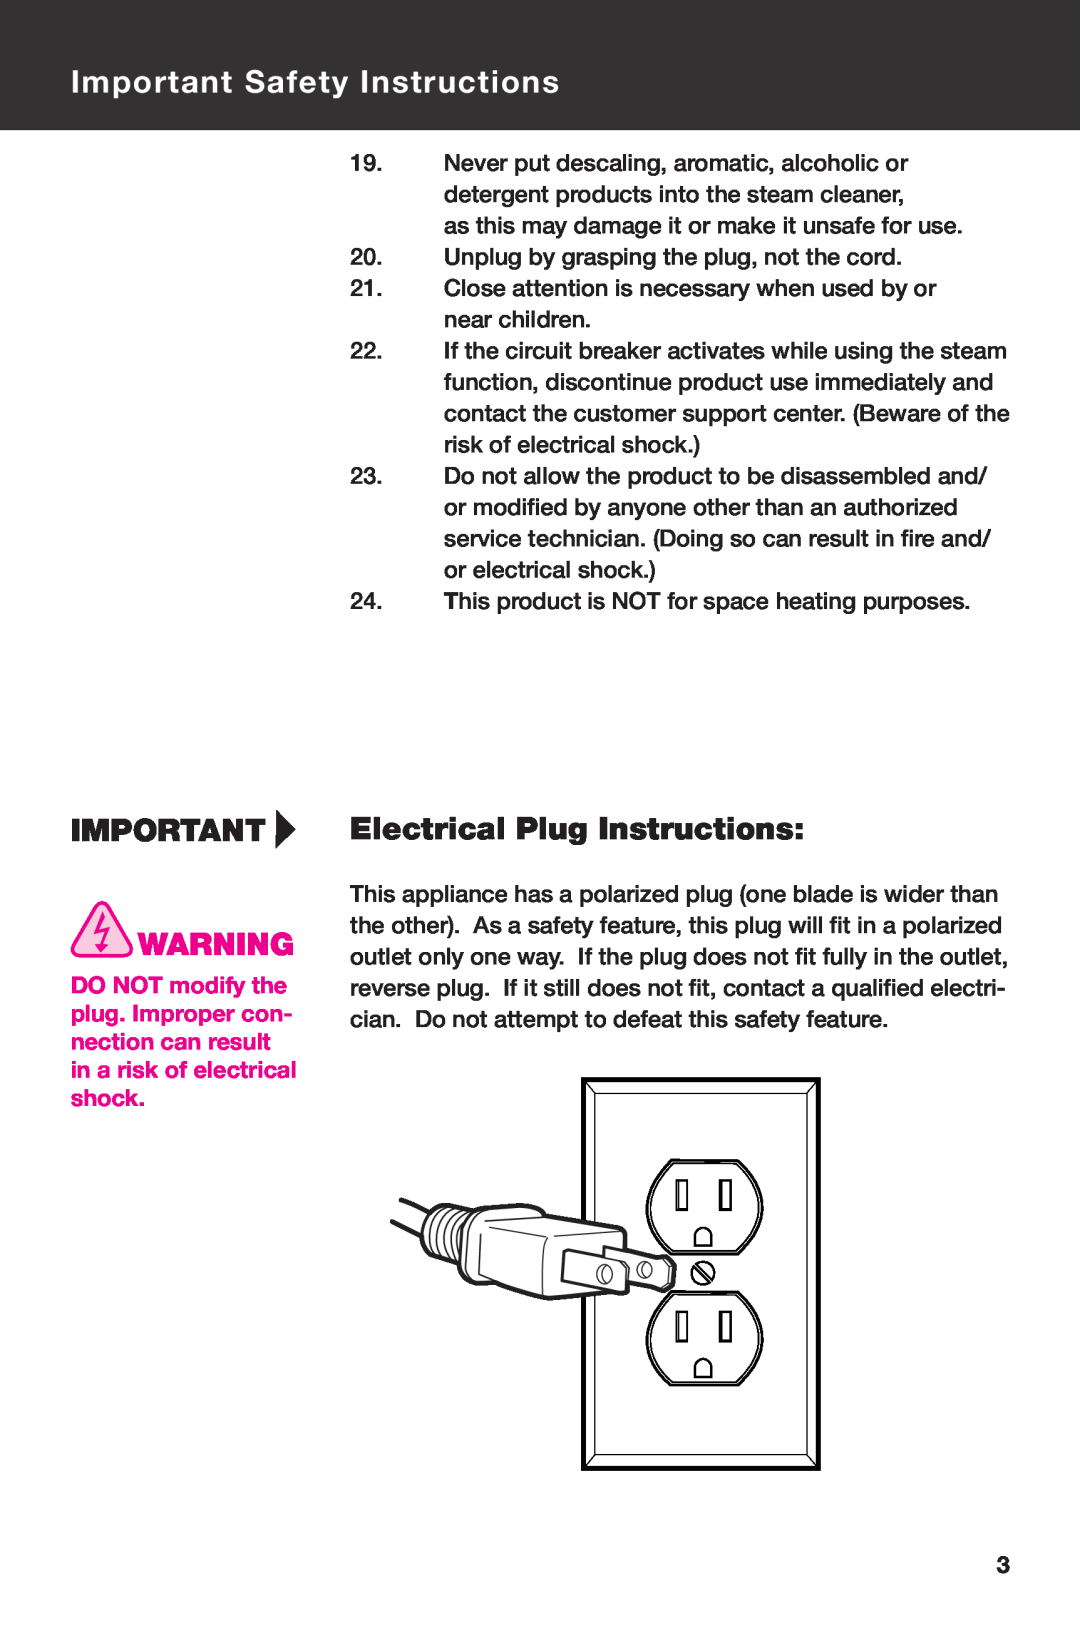 Haan SI-35 instruction manual Electrical Plug Instructions, Important Safety Instructions 